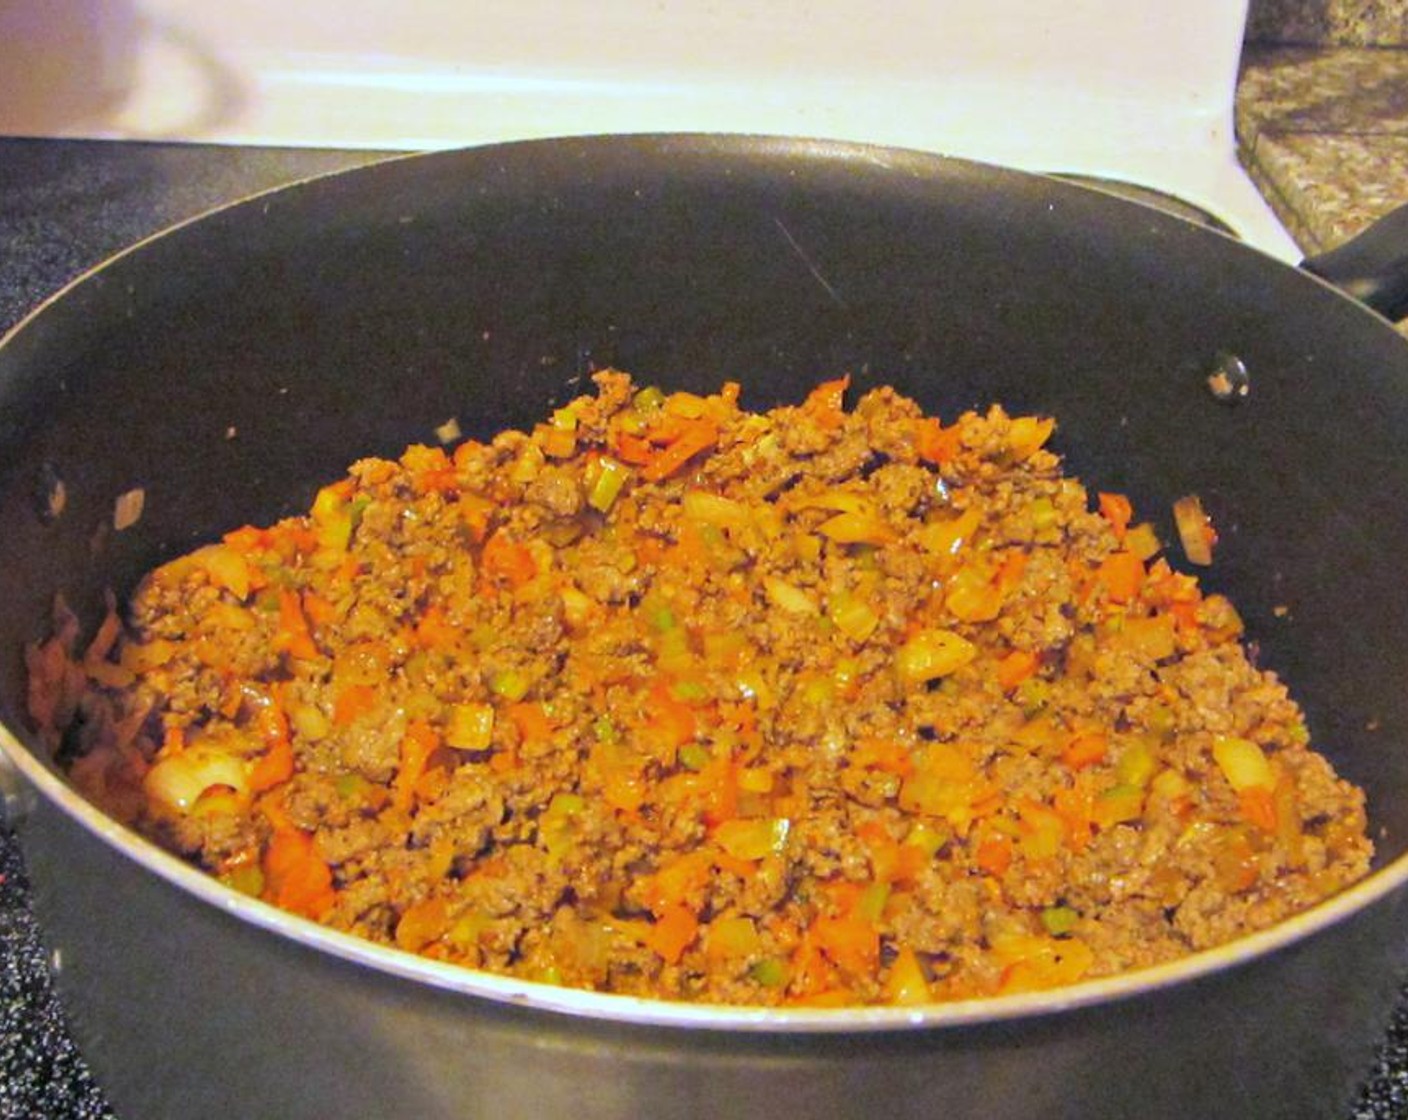 step 3 When the beef is almost fully cooked, add Salt (1 tsp), Ground Black Pepper (1/2 tsp), and Dried Oregano (1/2 Tbsp), to the ground meat. Once browned, drain any excess fat from the beef and set aside.